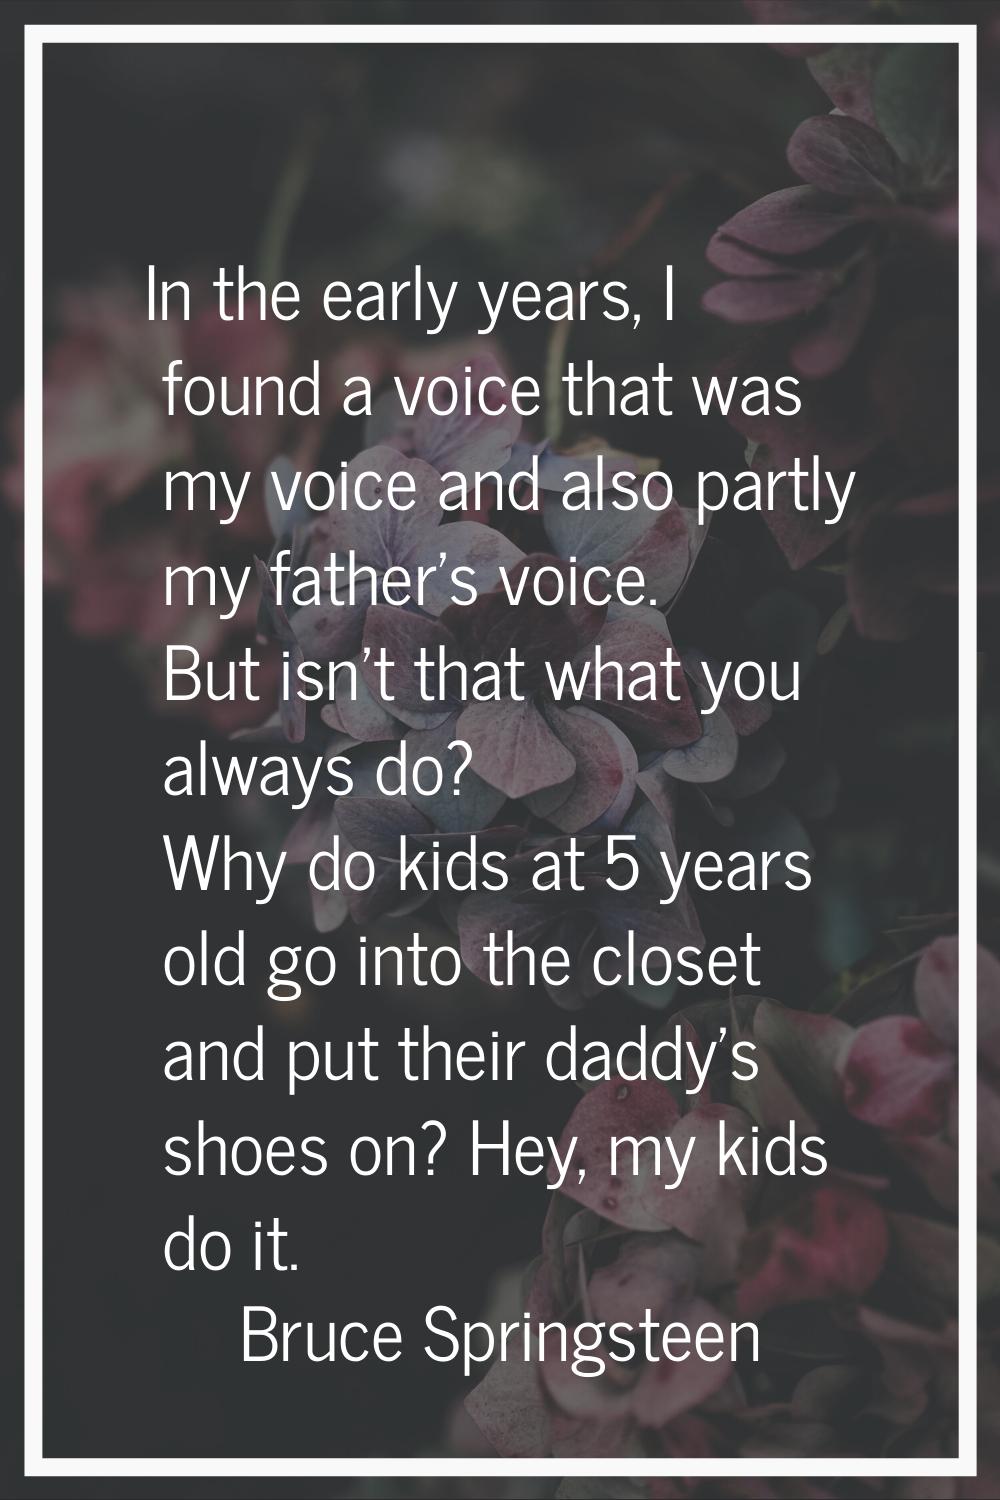 In the early years, I found a voice that was my voice and also partly my father's voice. But isn't 